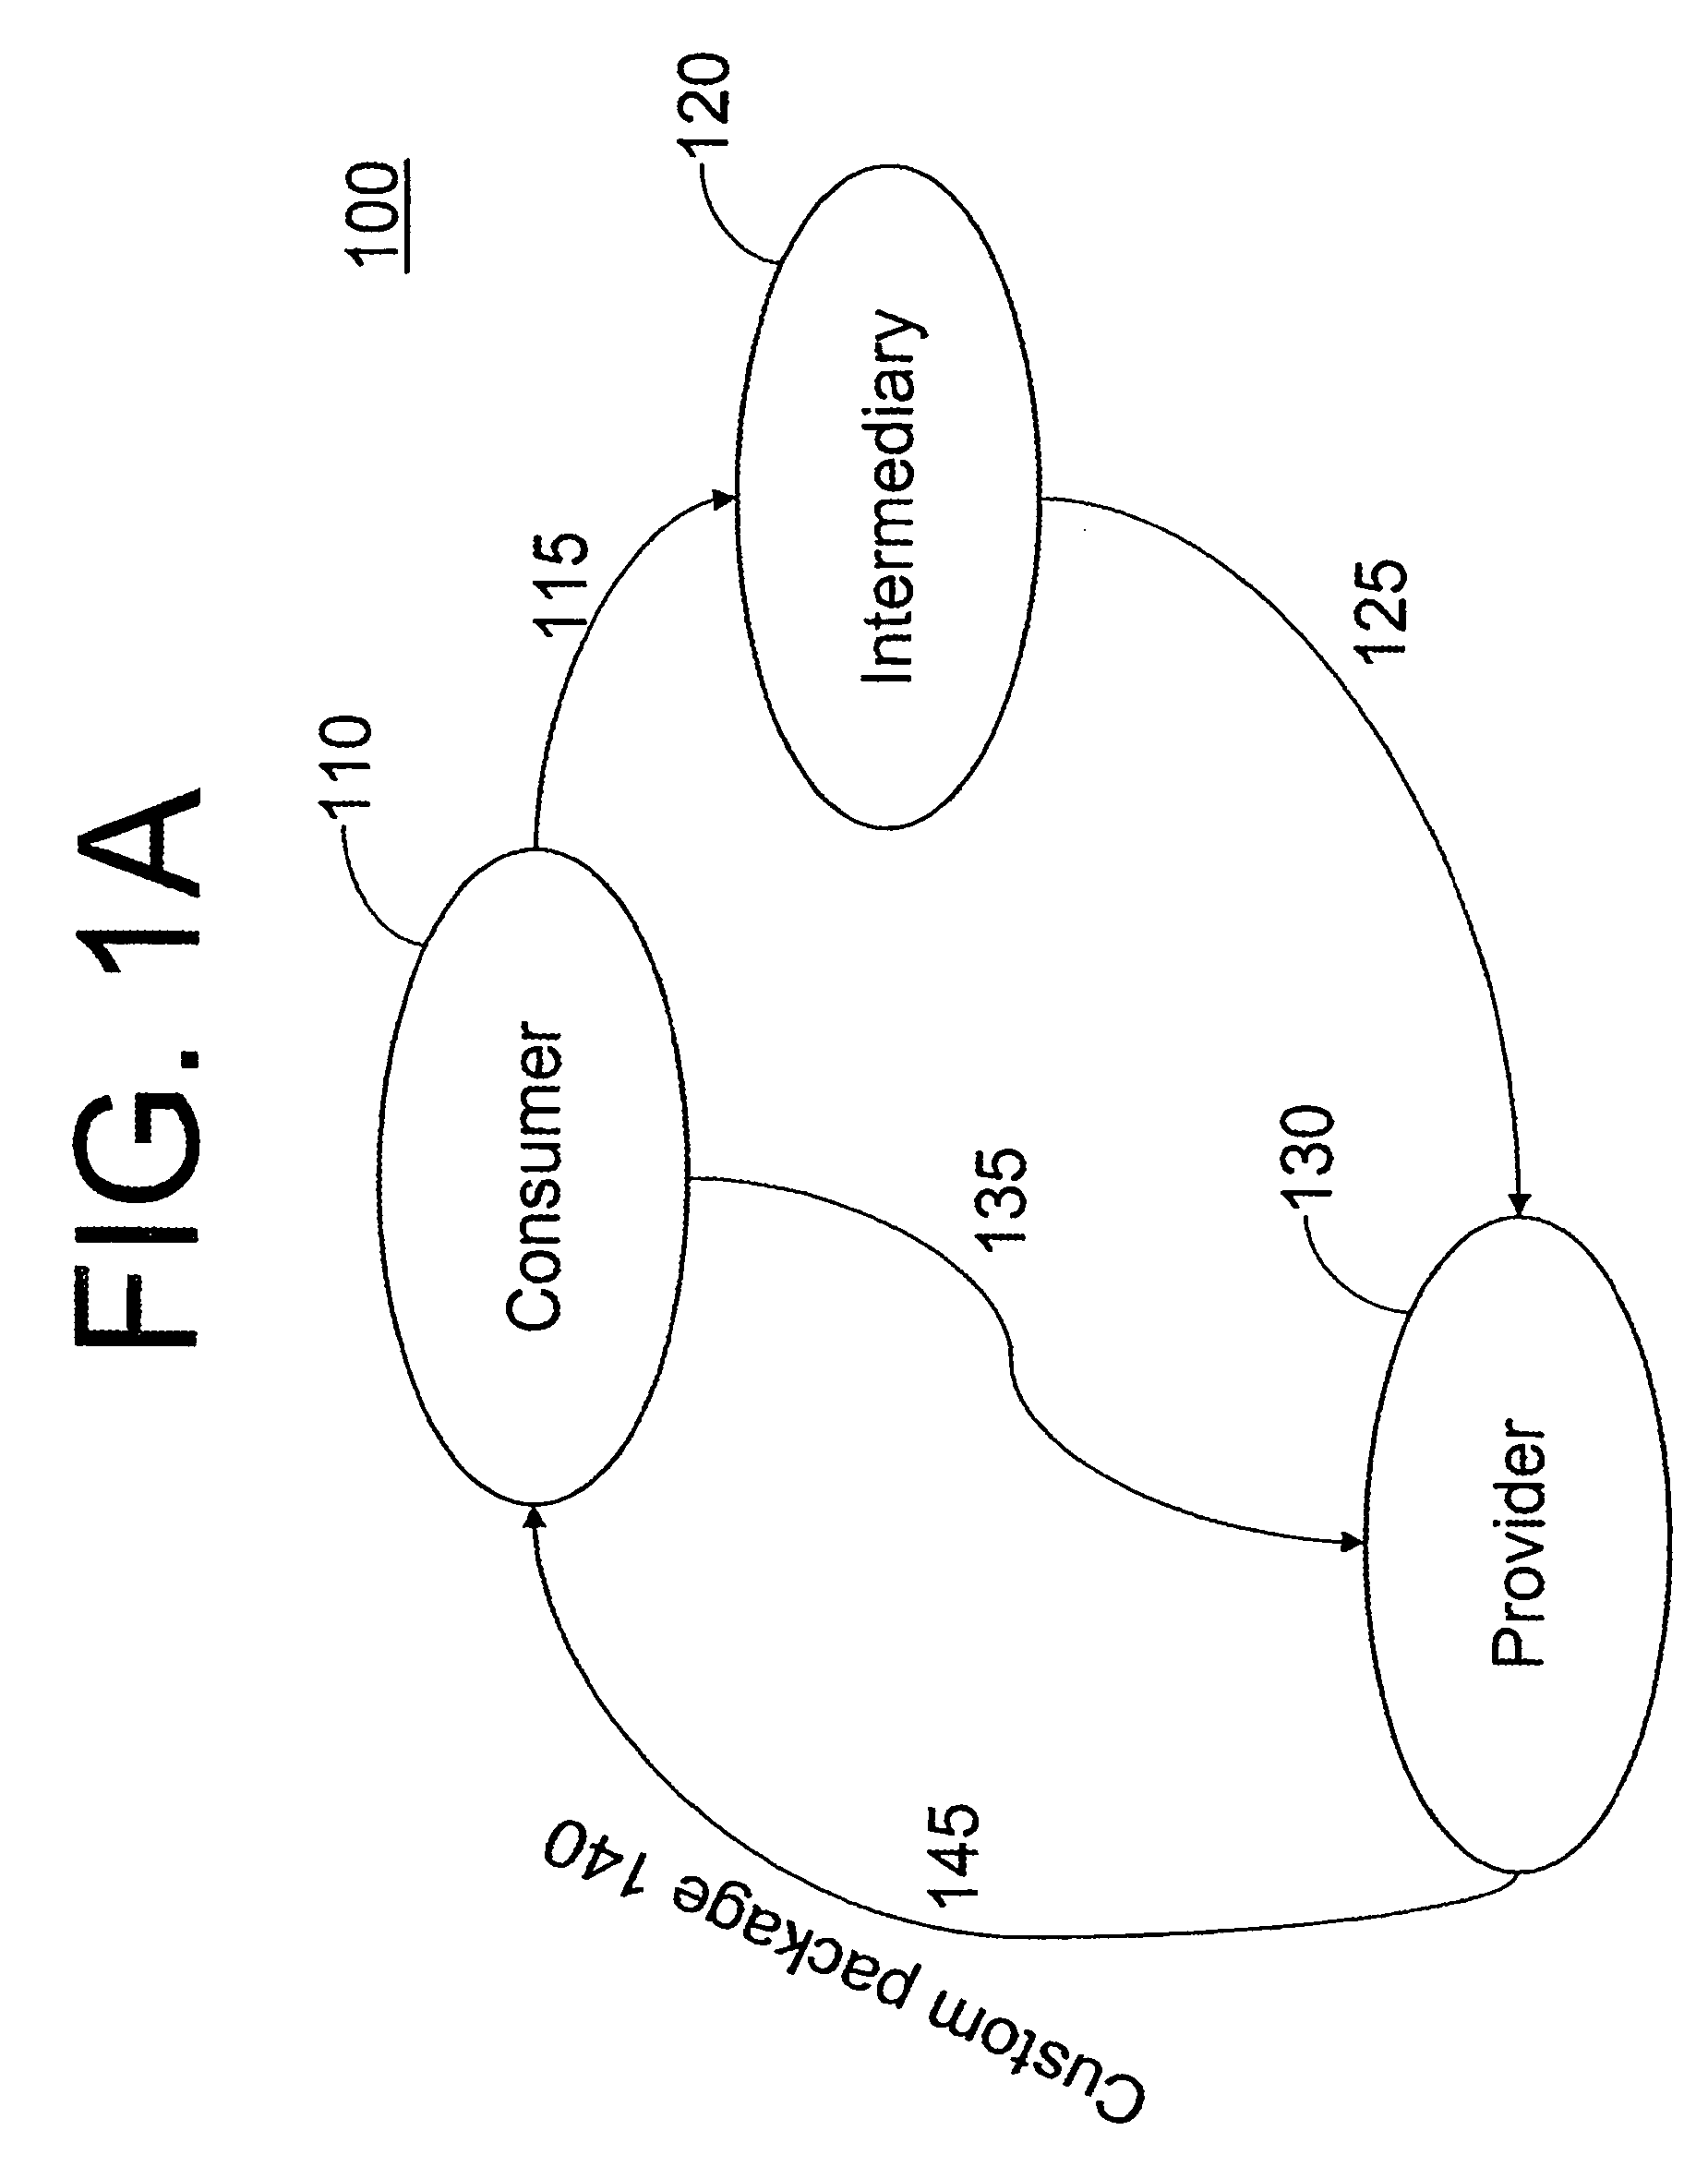 Method and system for facilitating individualized packaging and follow-up capability on a mass scale